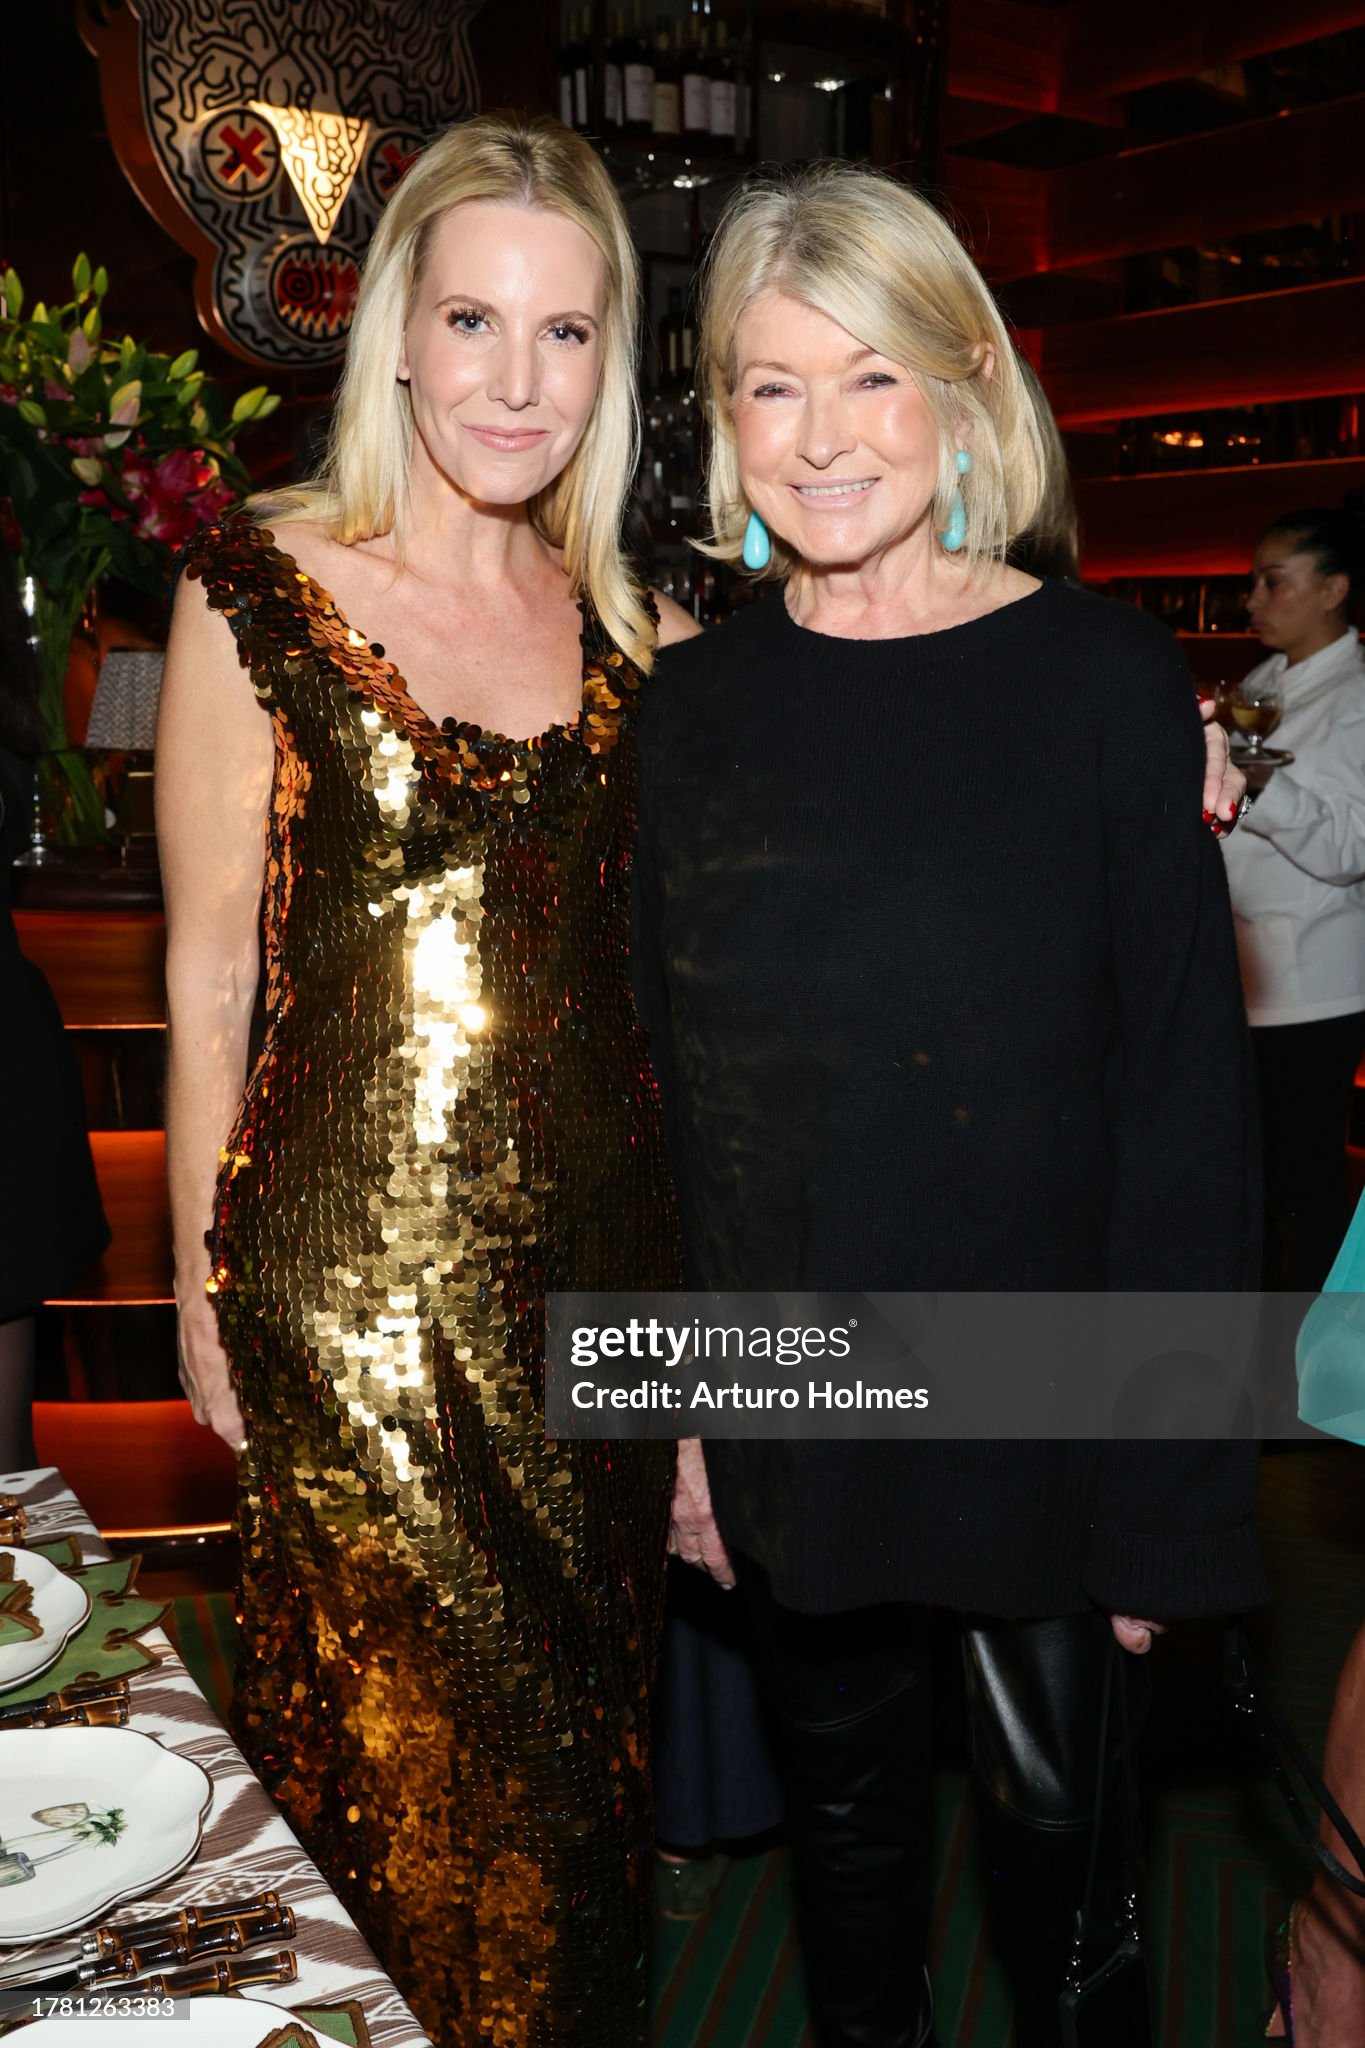 https://media.gettyimages.com/id/1781263383/photo/nina-garcia-alice-naylor-leyland-celebrate-tablescape-and-holiday-collection.jpg?s=2048x2048&w=gi&k=20&c=a8gp8FjfioGDCnCn2HCxrRUo-gzt4lchCWq2AZ2kh_M=